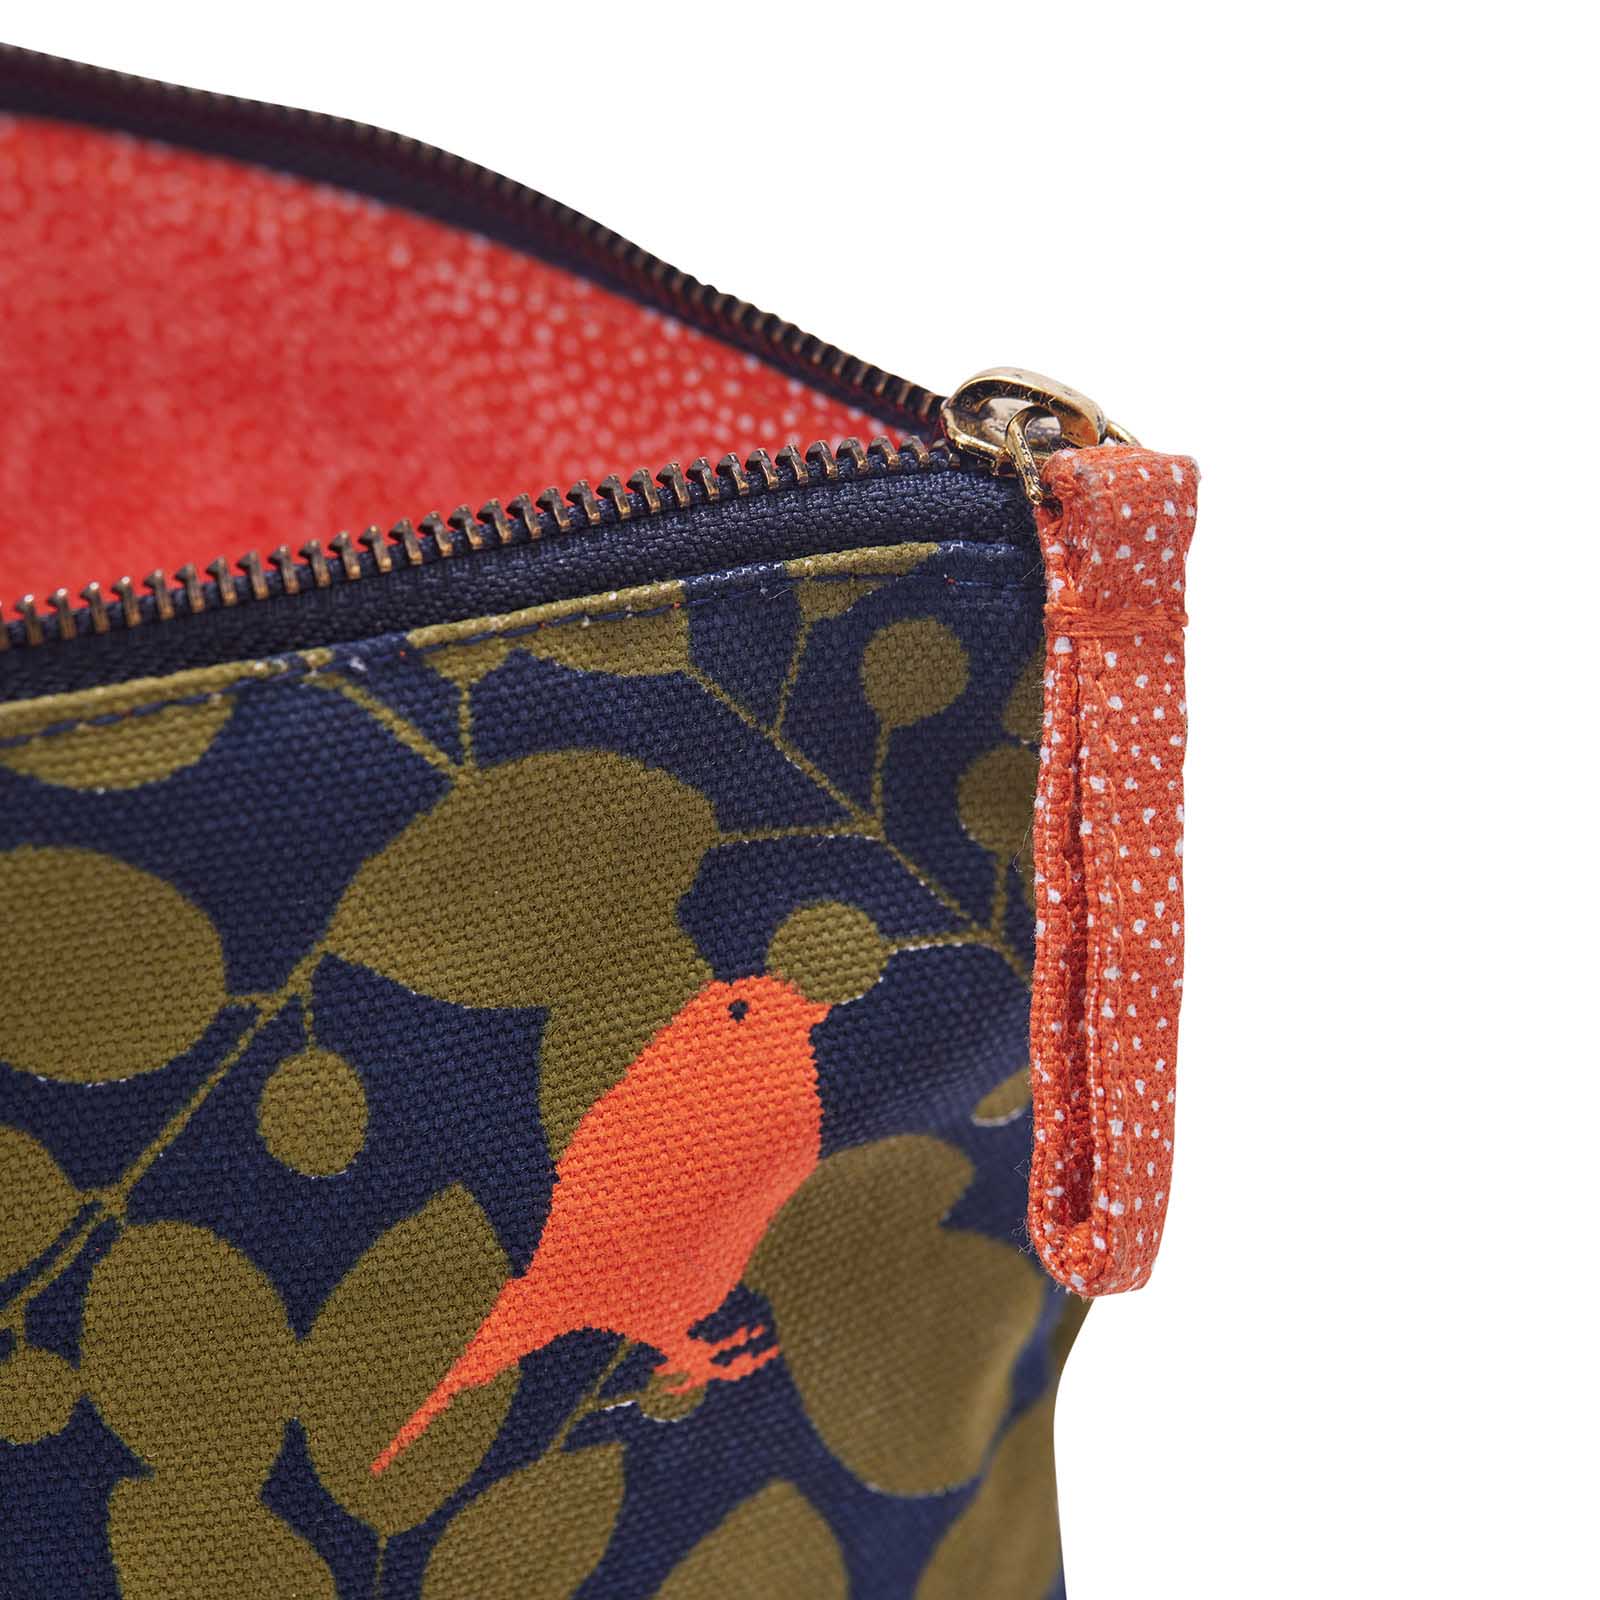 Finches Large Relaxed Pouch Pouch - rockflowerpaper